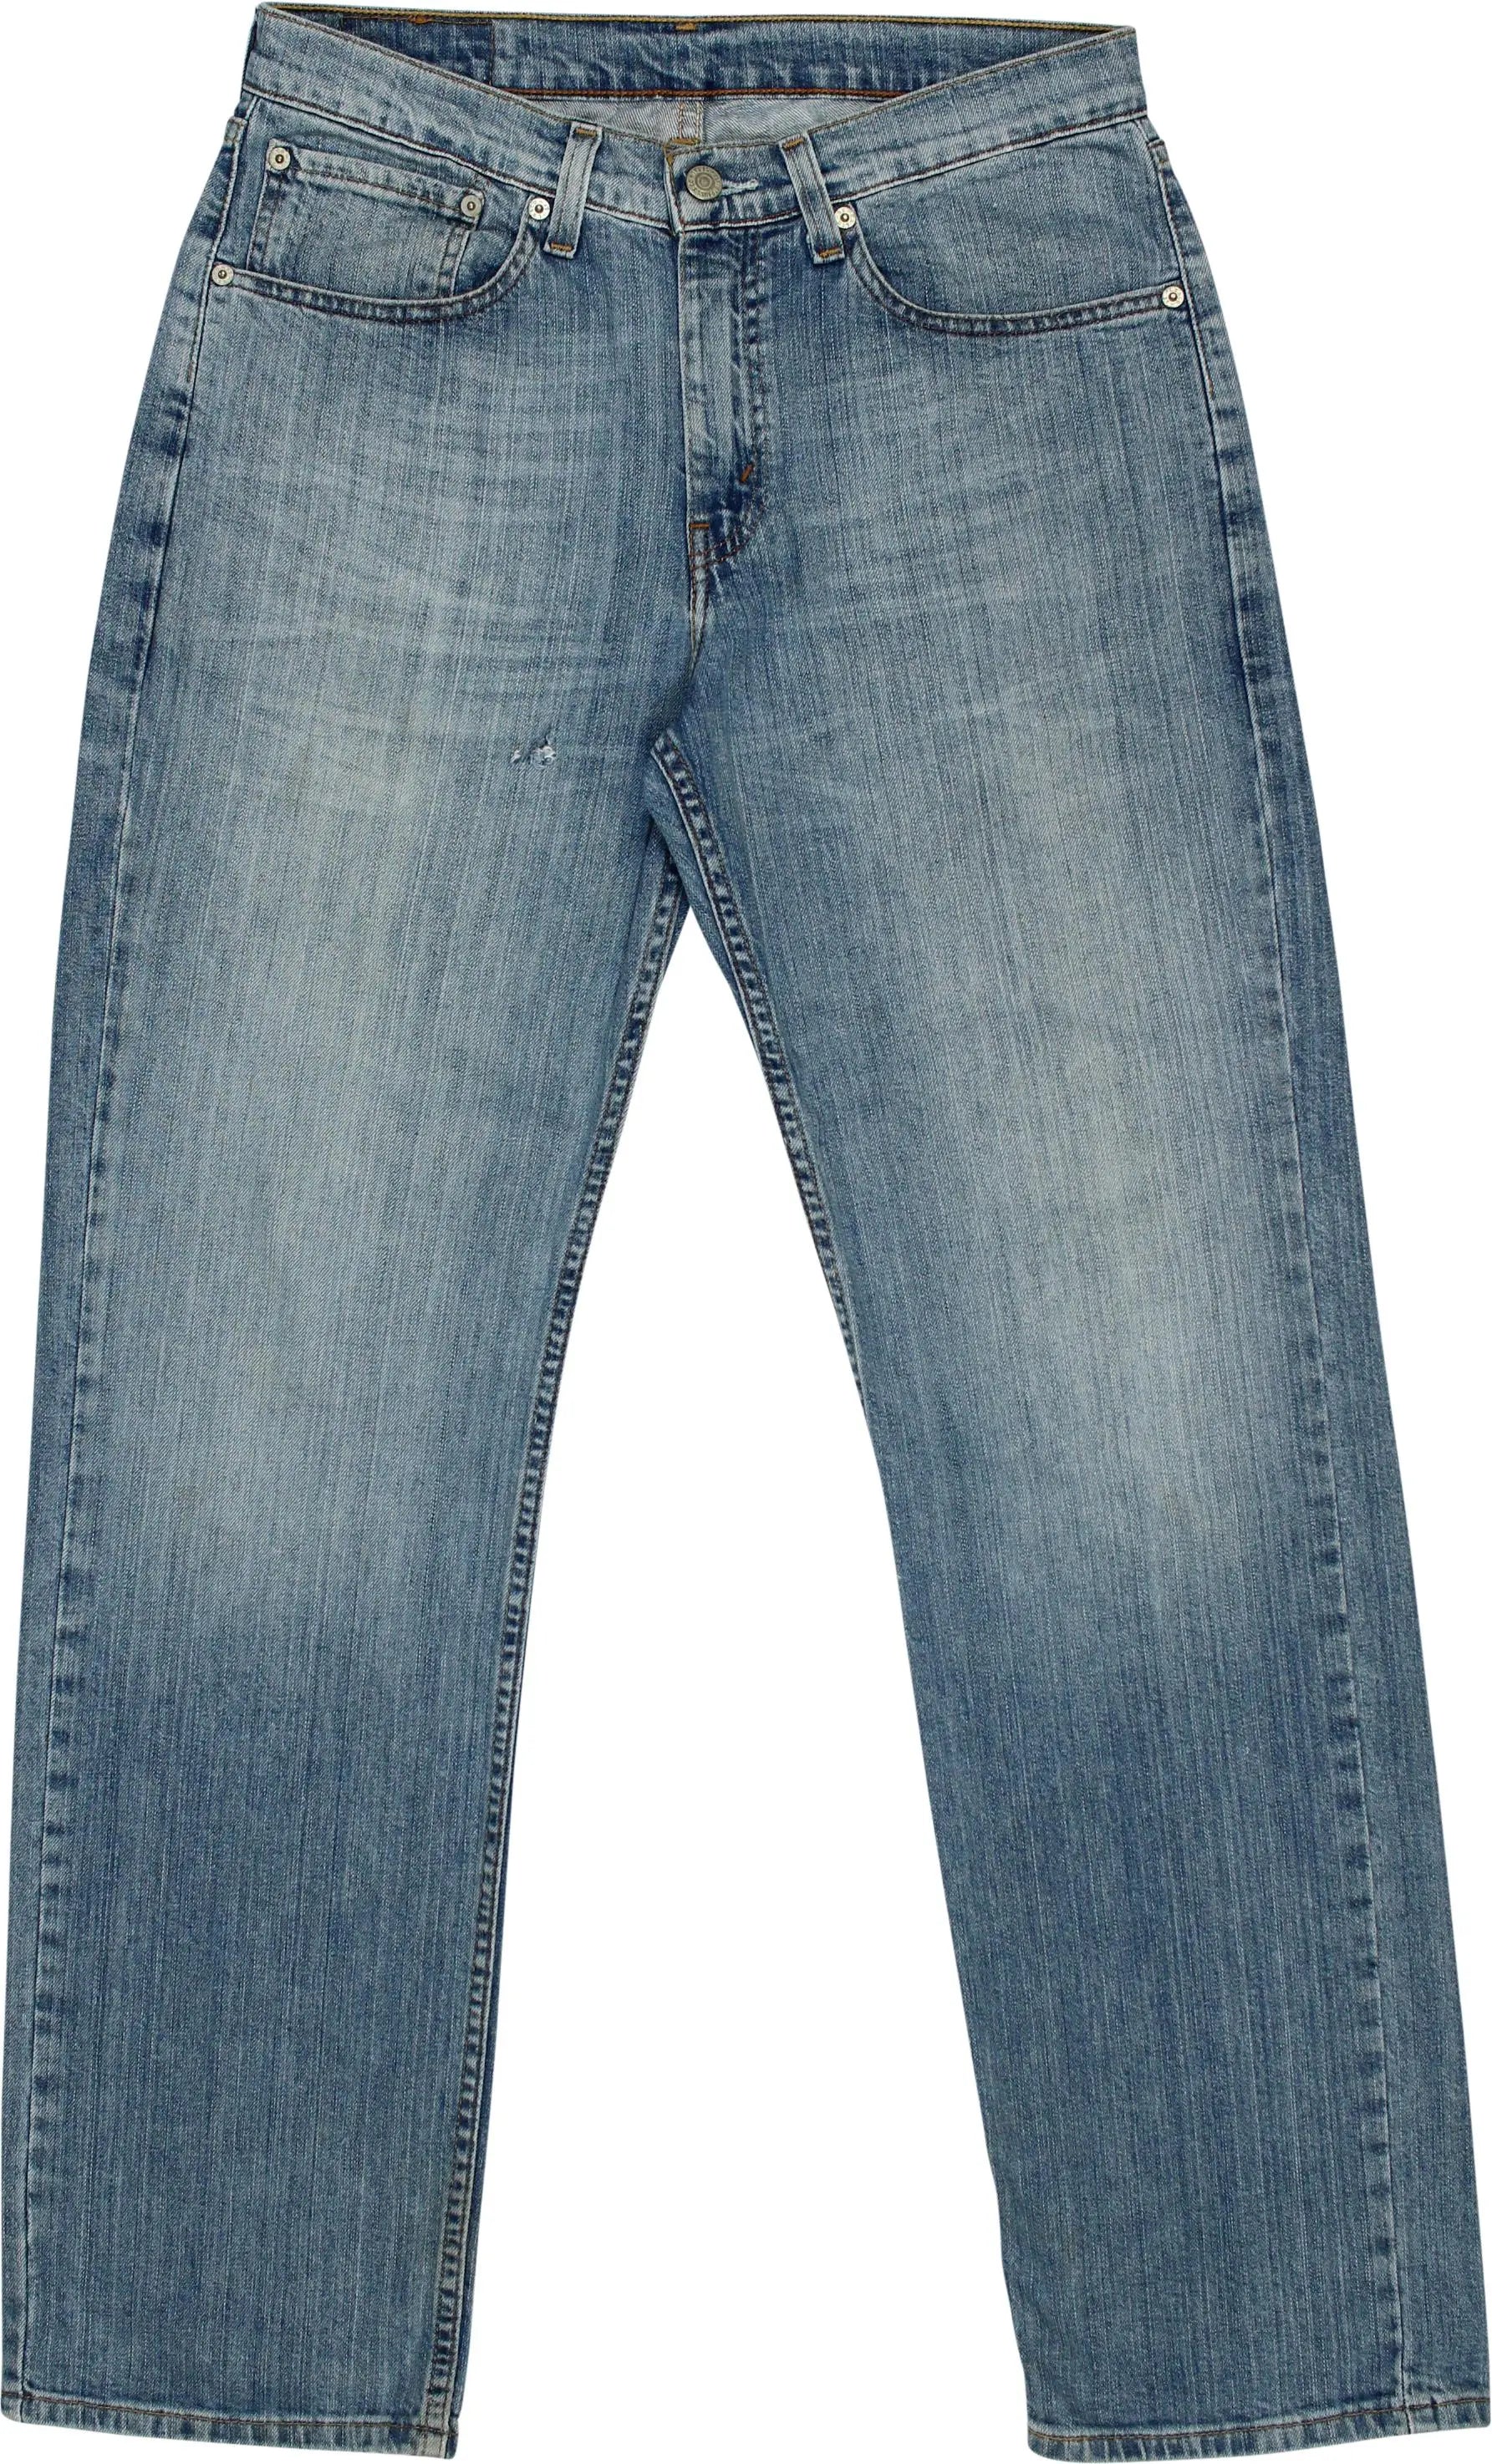 Levi's - 751 Jeans by Levi's- ThriftTale.com - Vintage and second handclothing